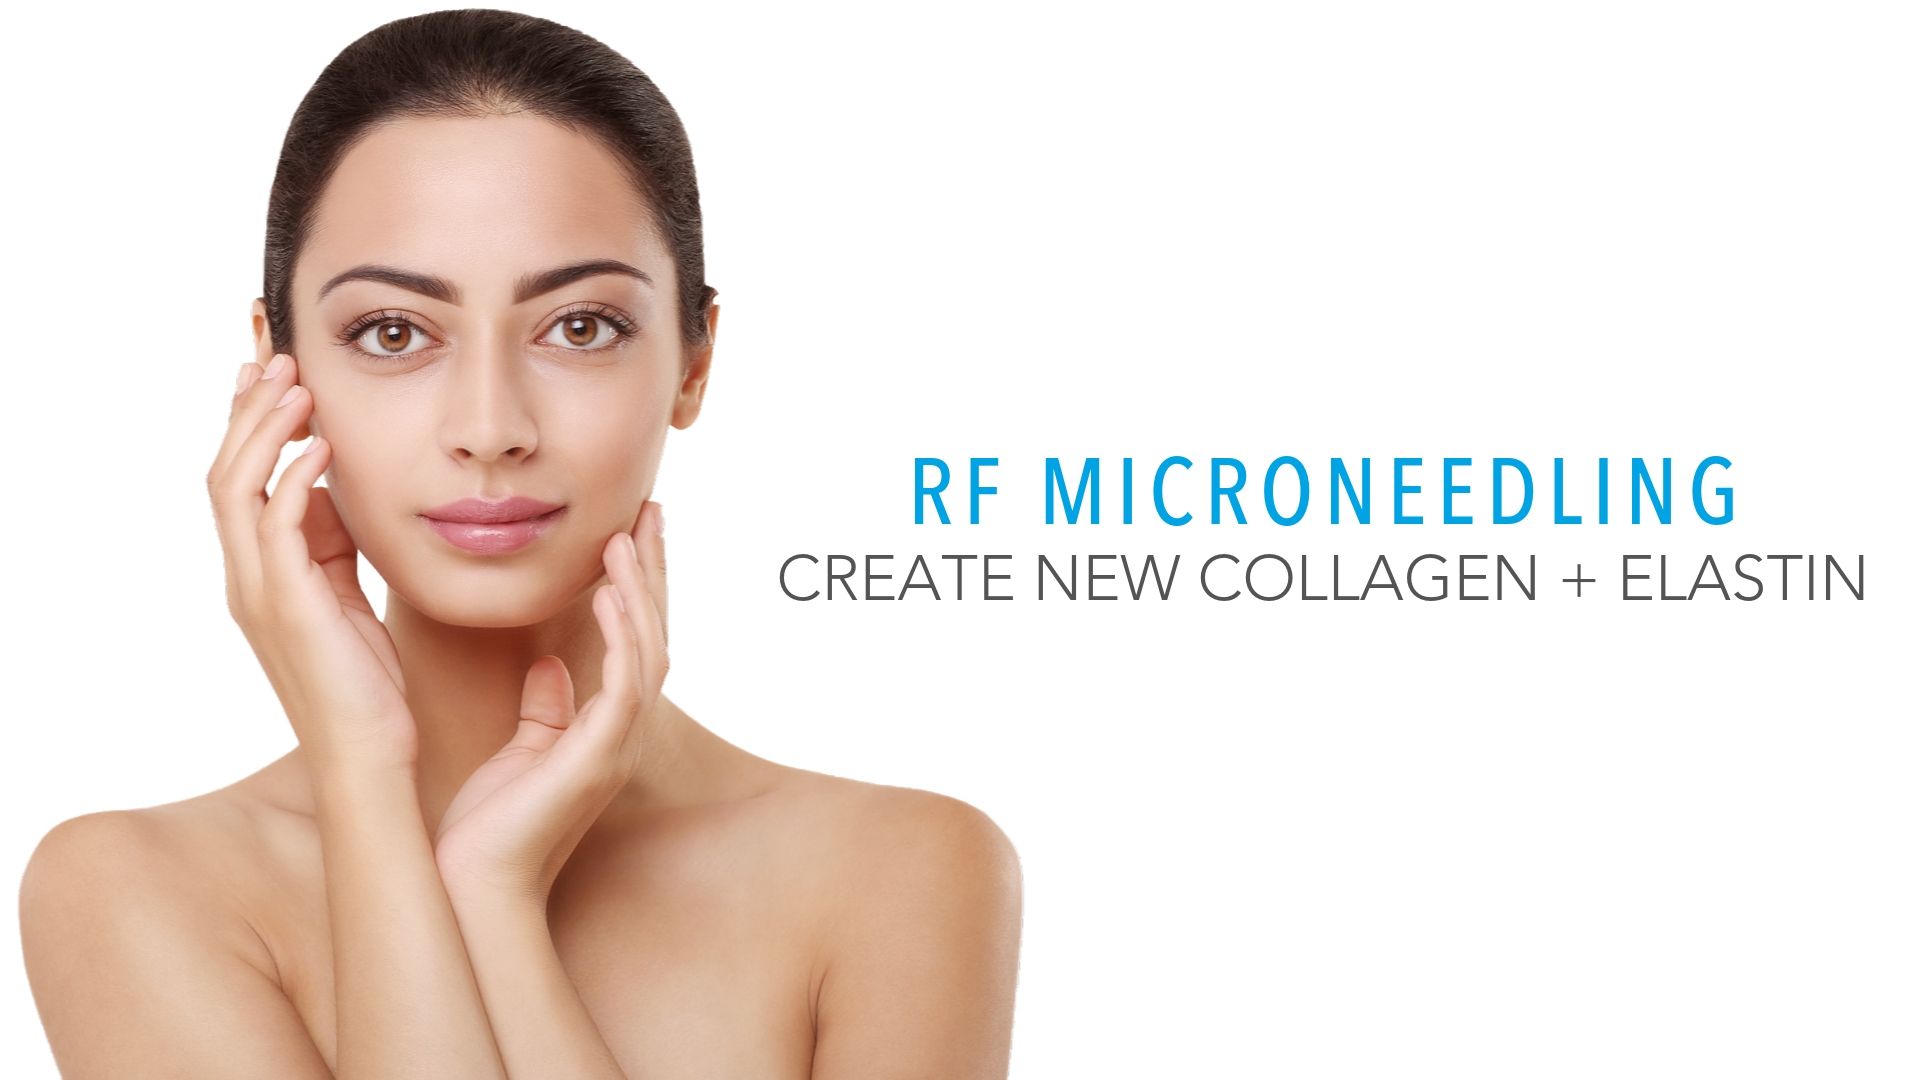 Woman touches her face after successful Microneedling treatment at shore medical aesthetics.